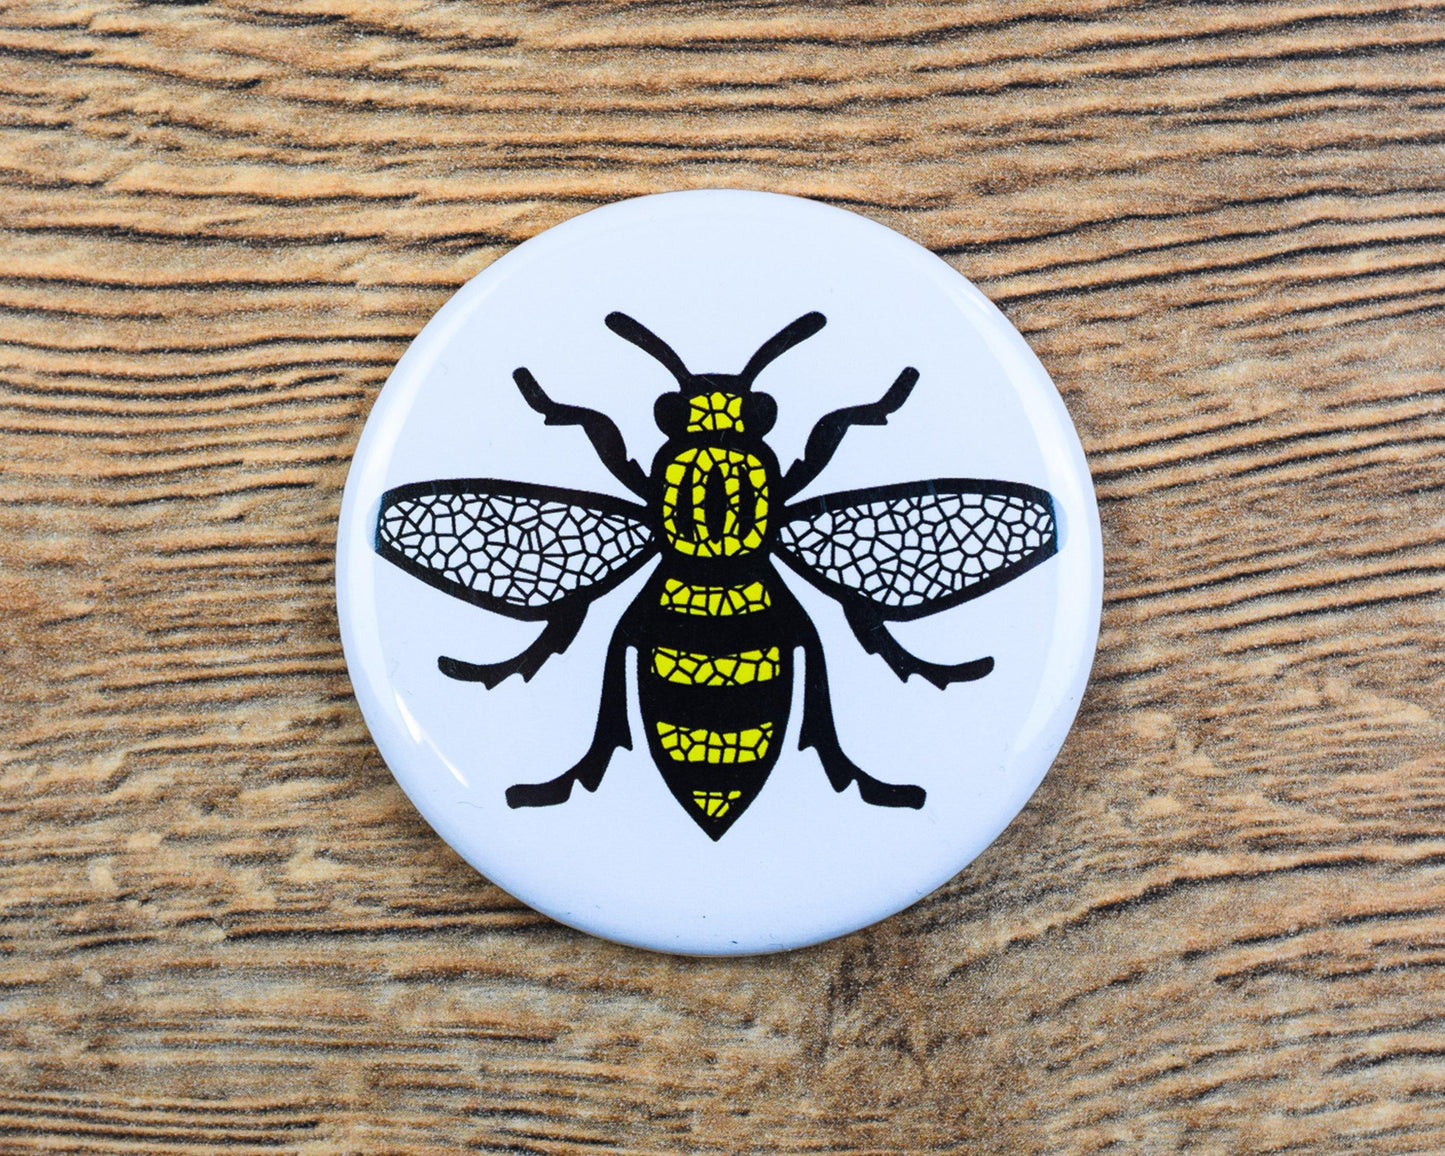 Mosaic Manchester Bee Magnet - The Manchester Shop